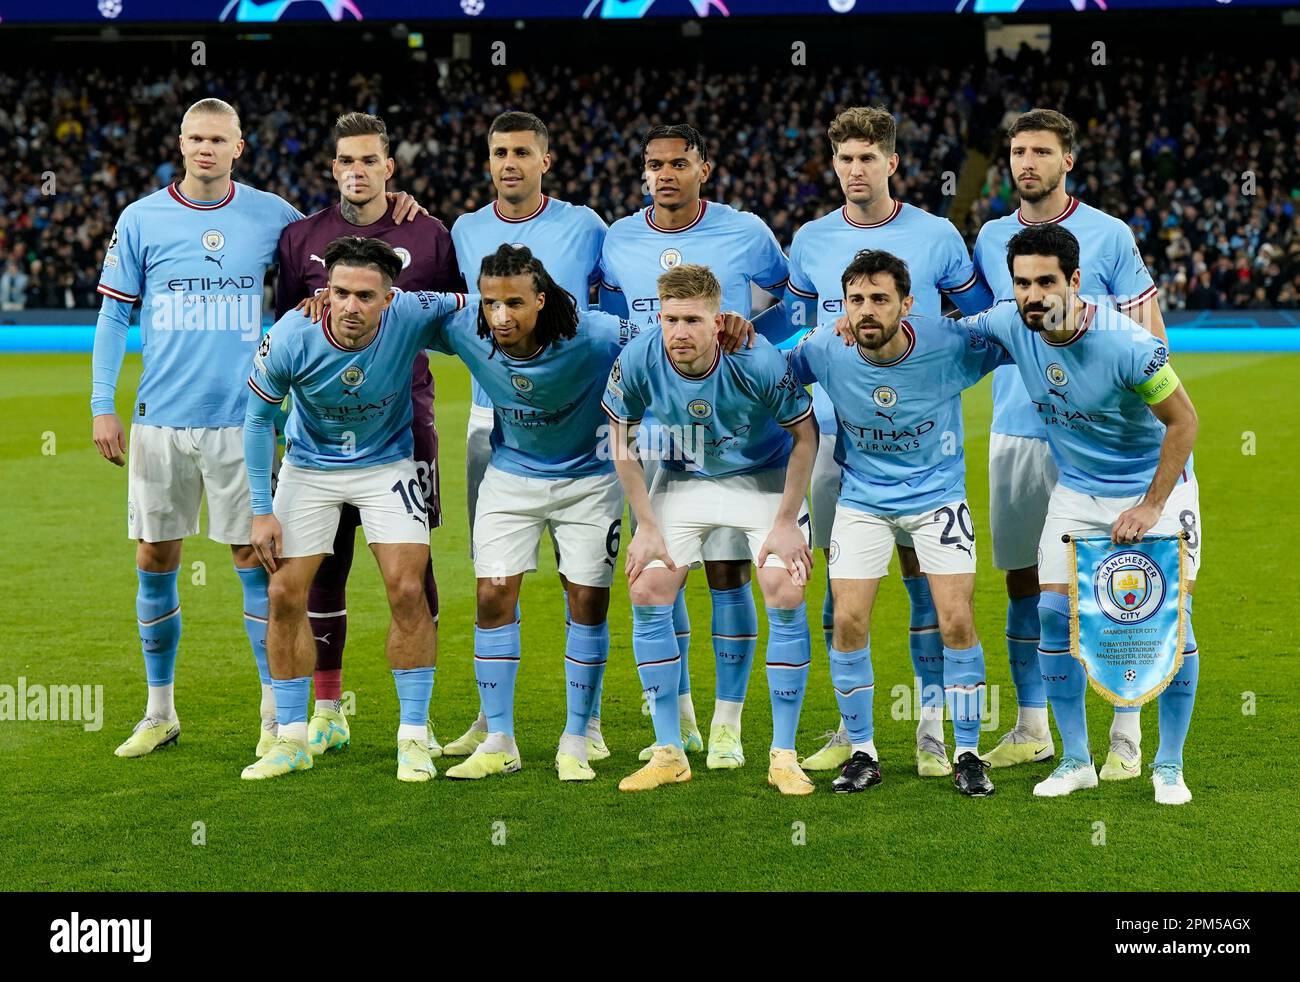 Manchester City confirm 23-man travelling squad to face Crvena zvezda in  UEFA Champions League